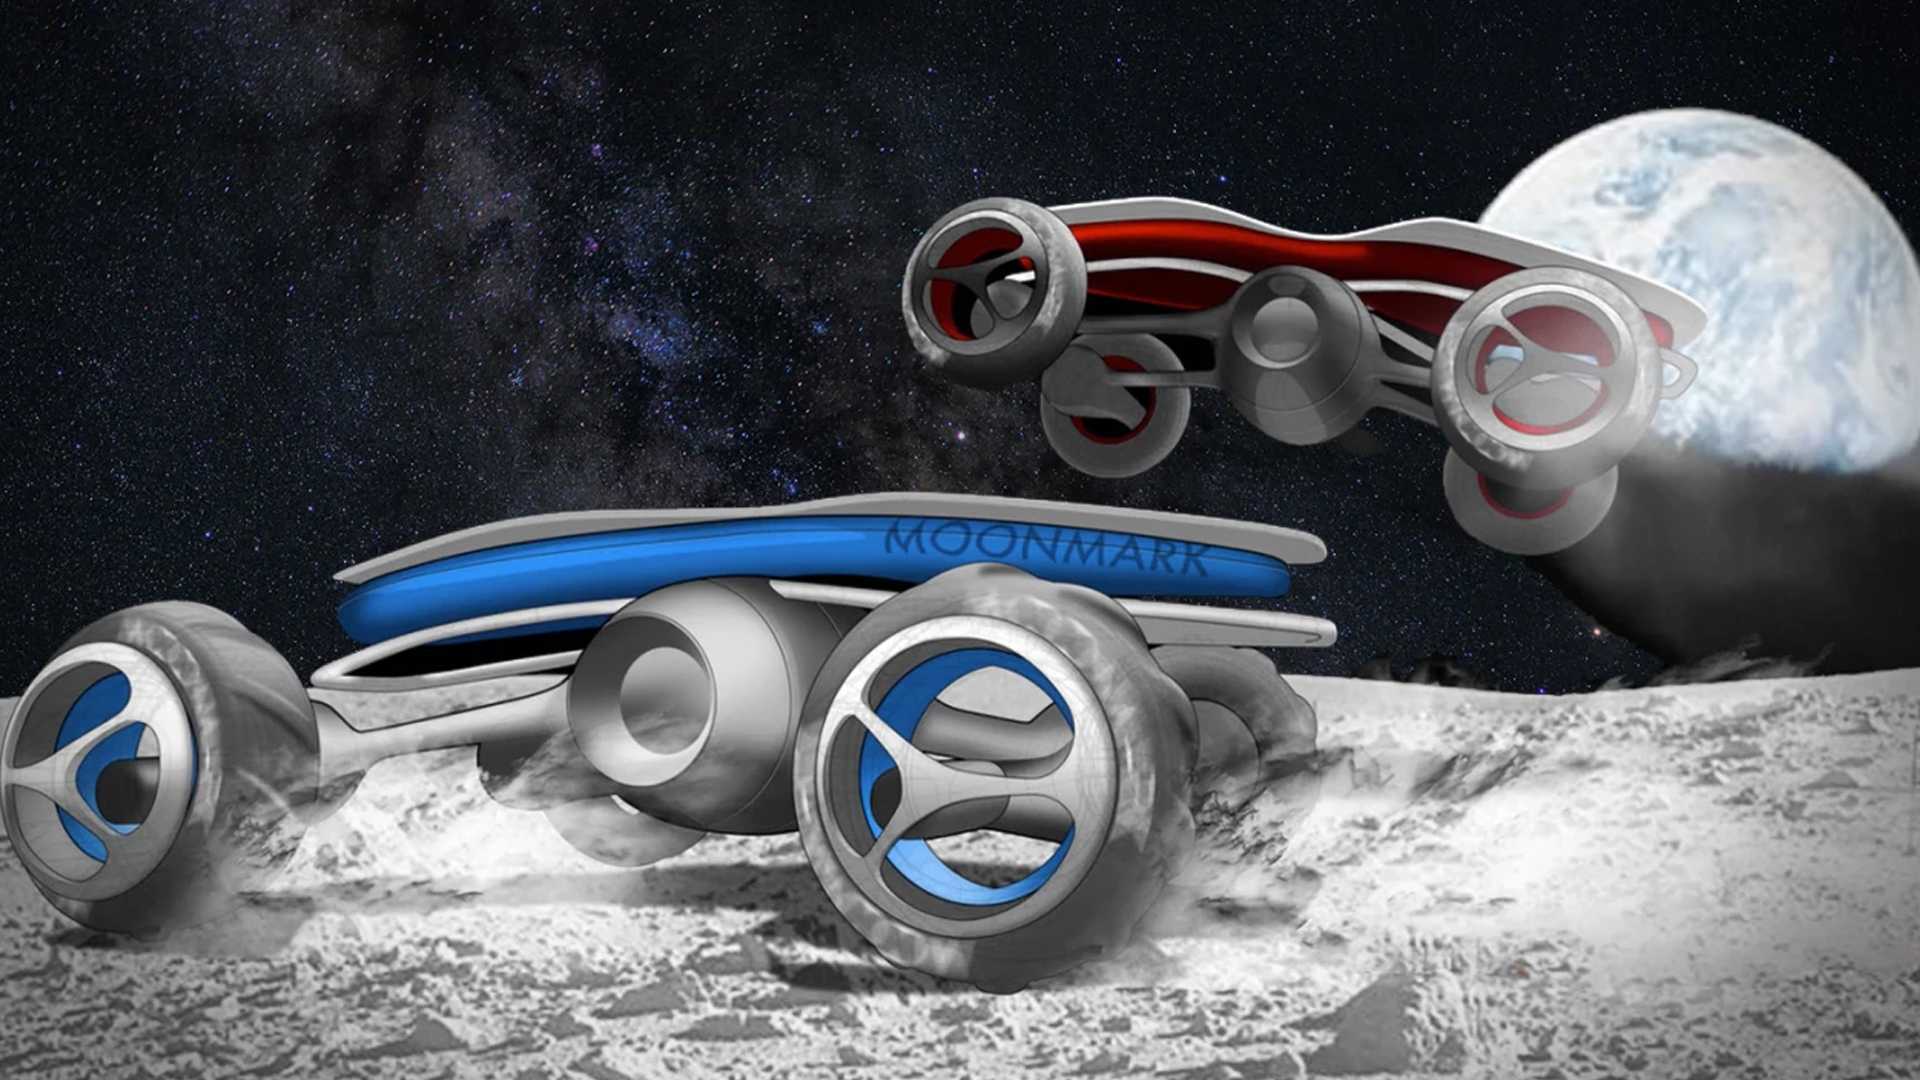 Highschools RC cars are designed for a race ... on the moon

